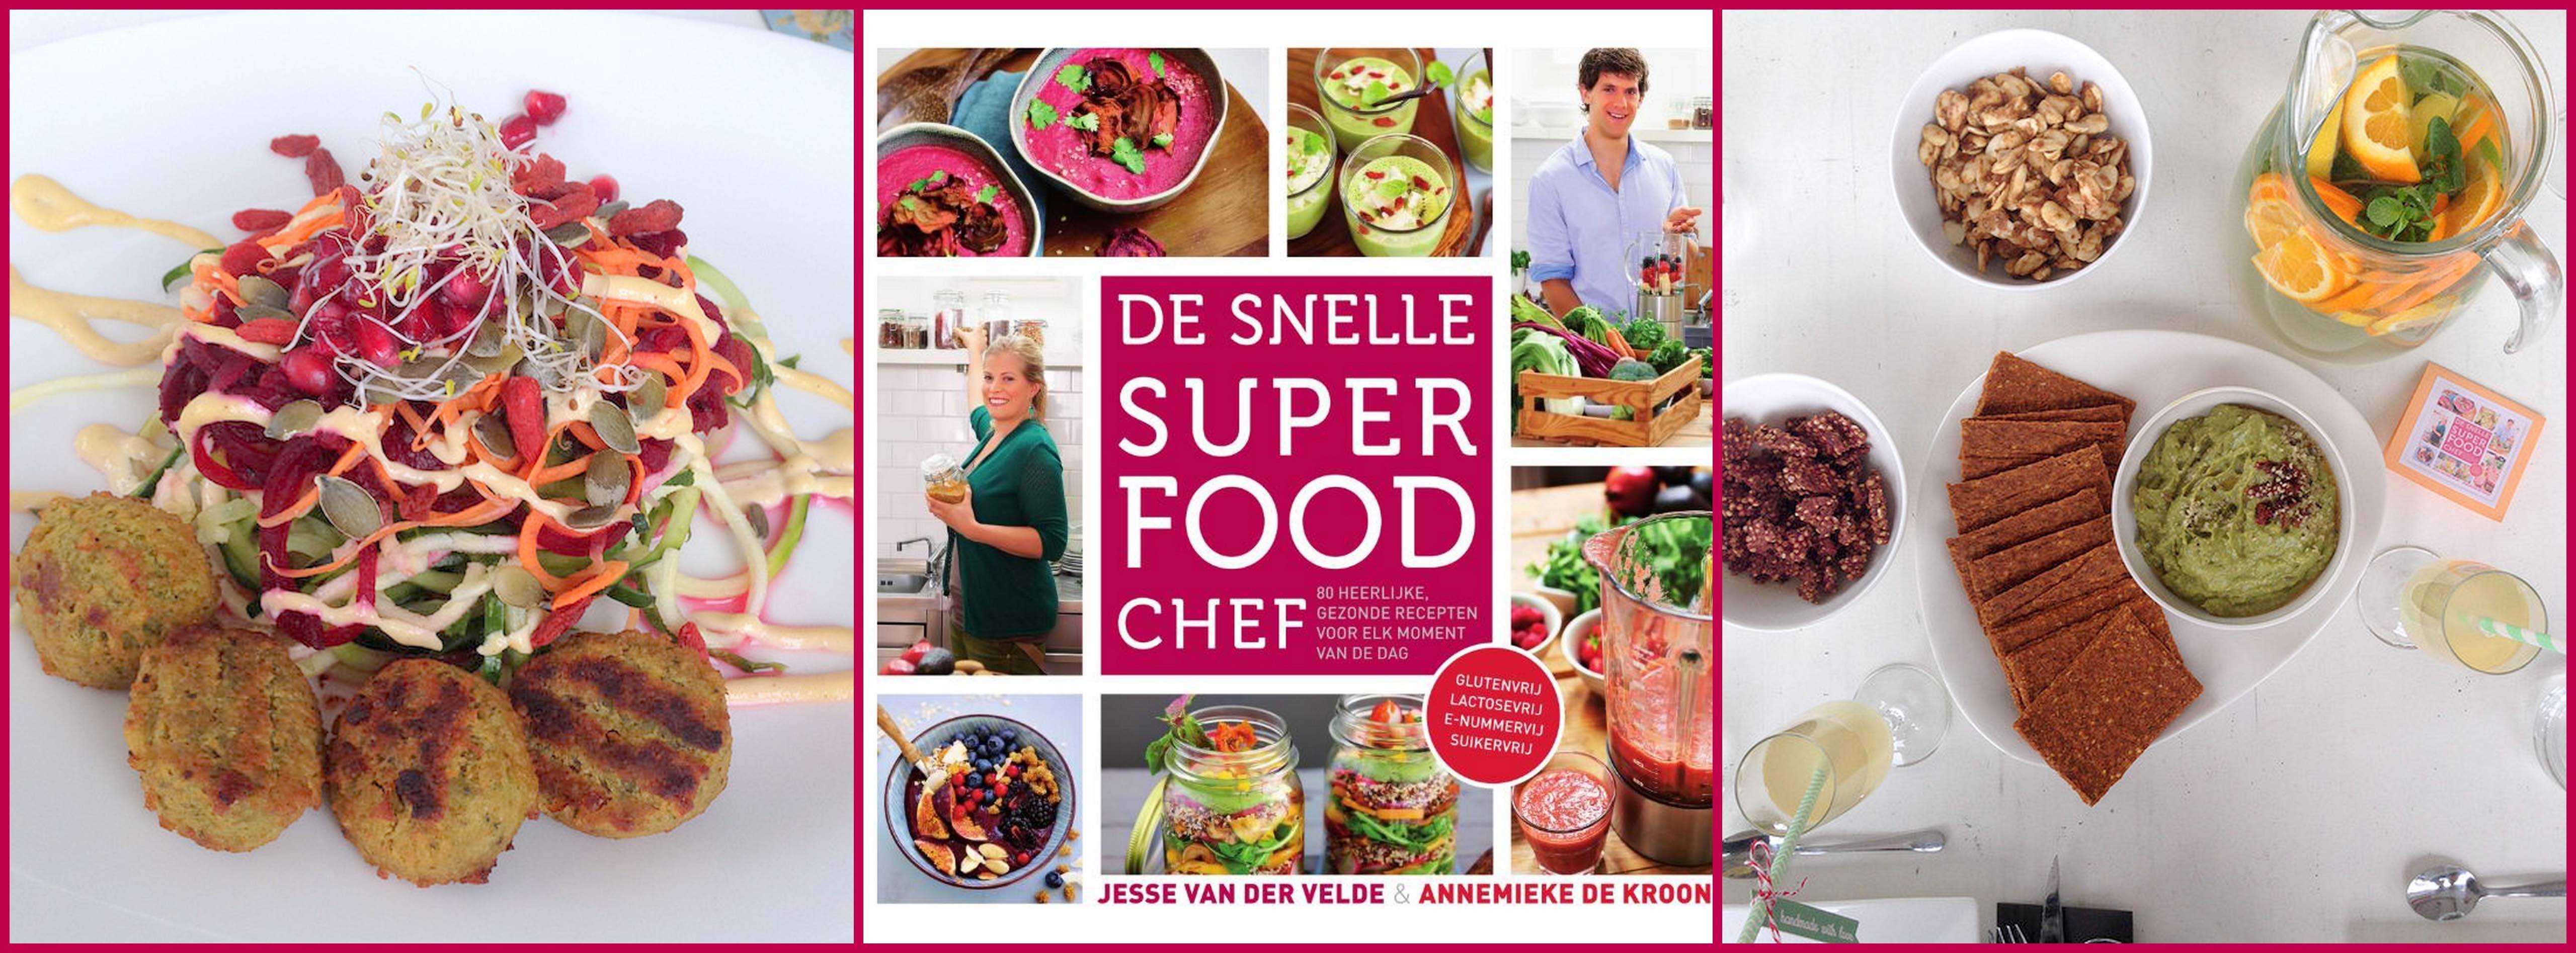 snelle superfood chef